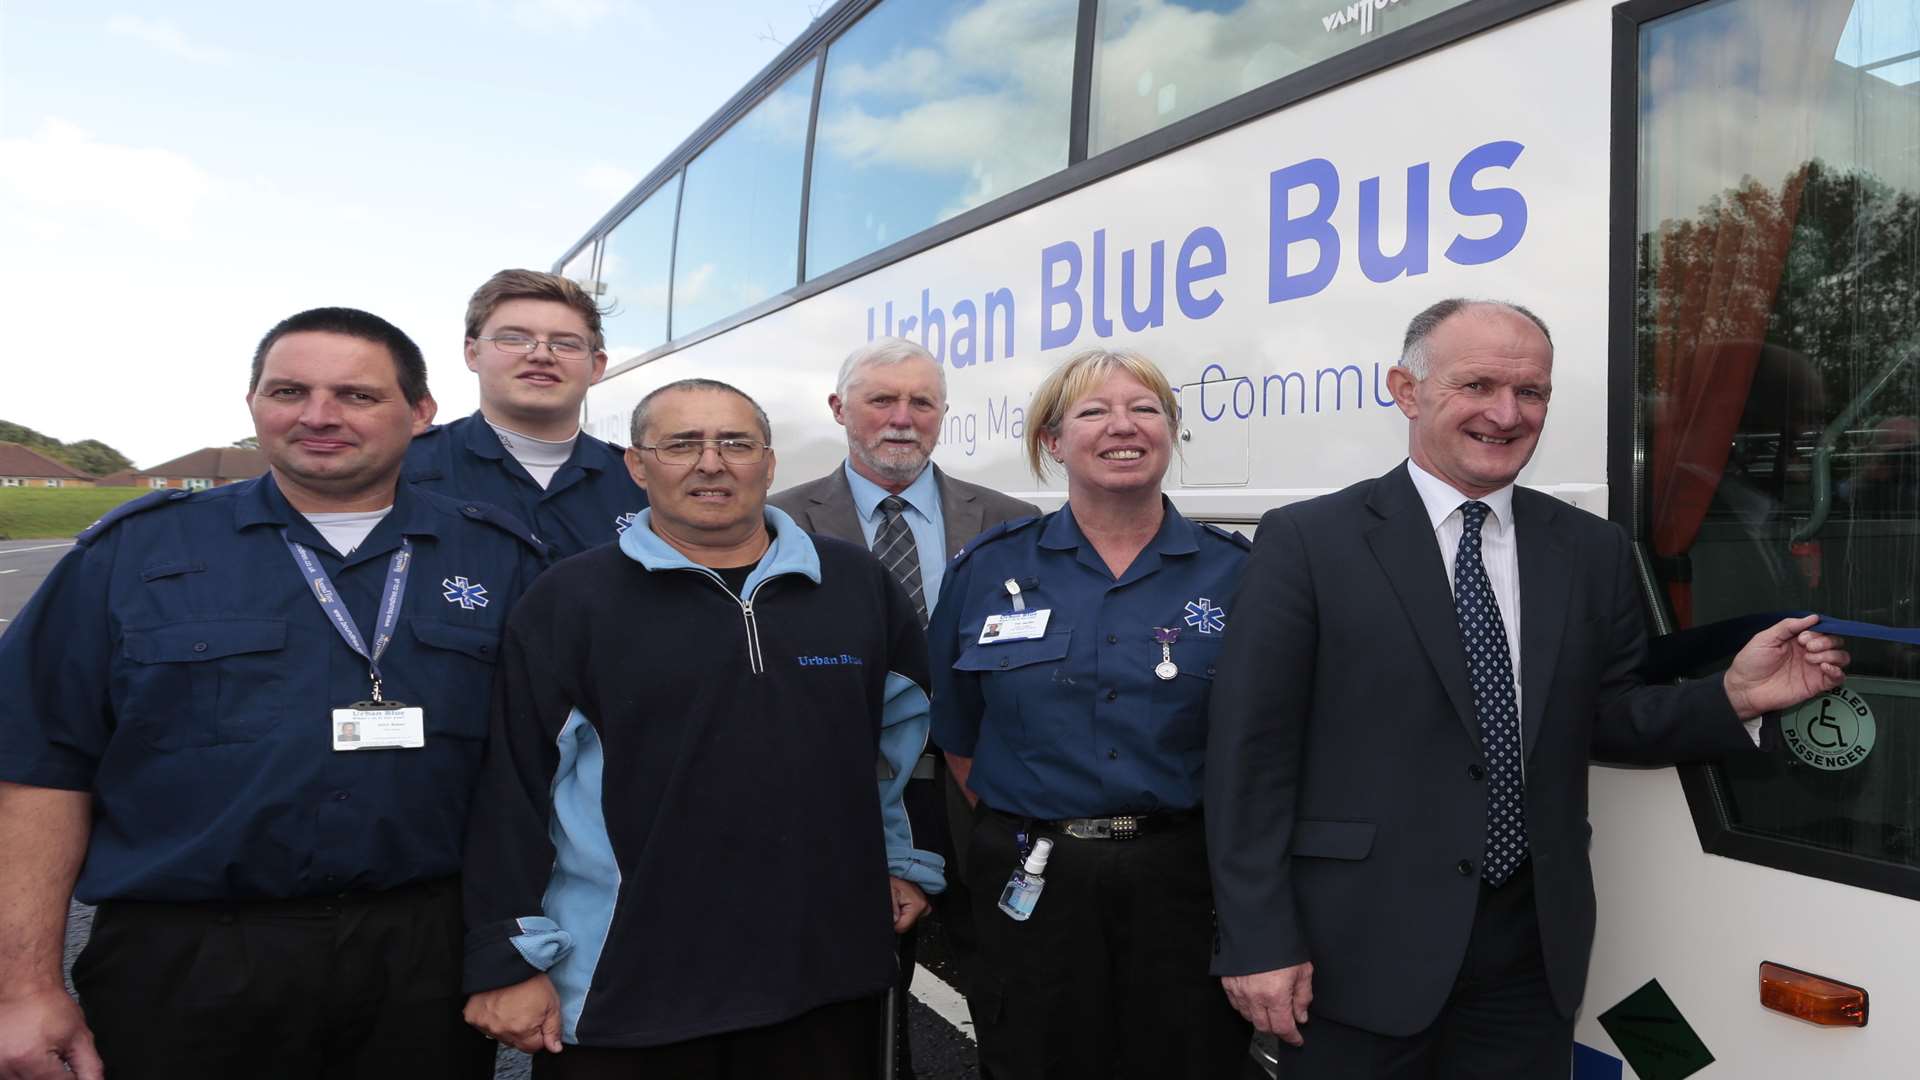 Some of the Urban Blue Bus team when the new bus was re-launched recently